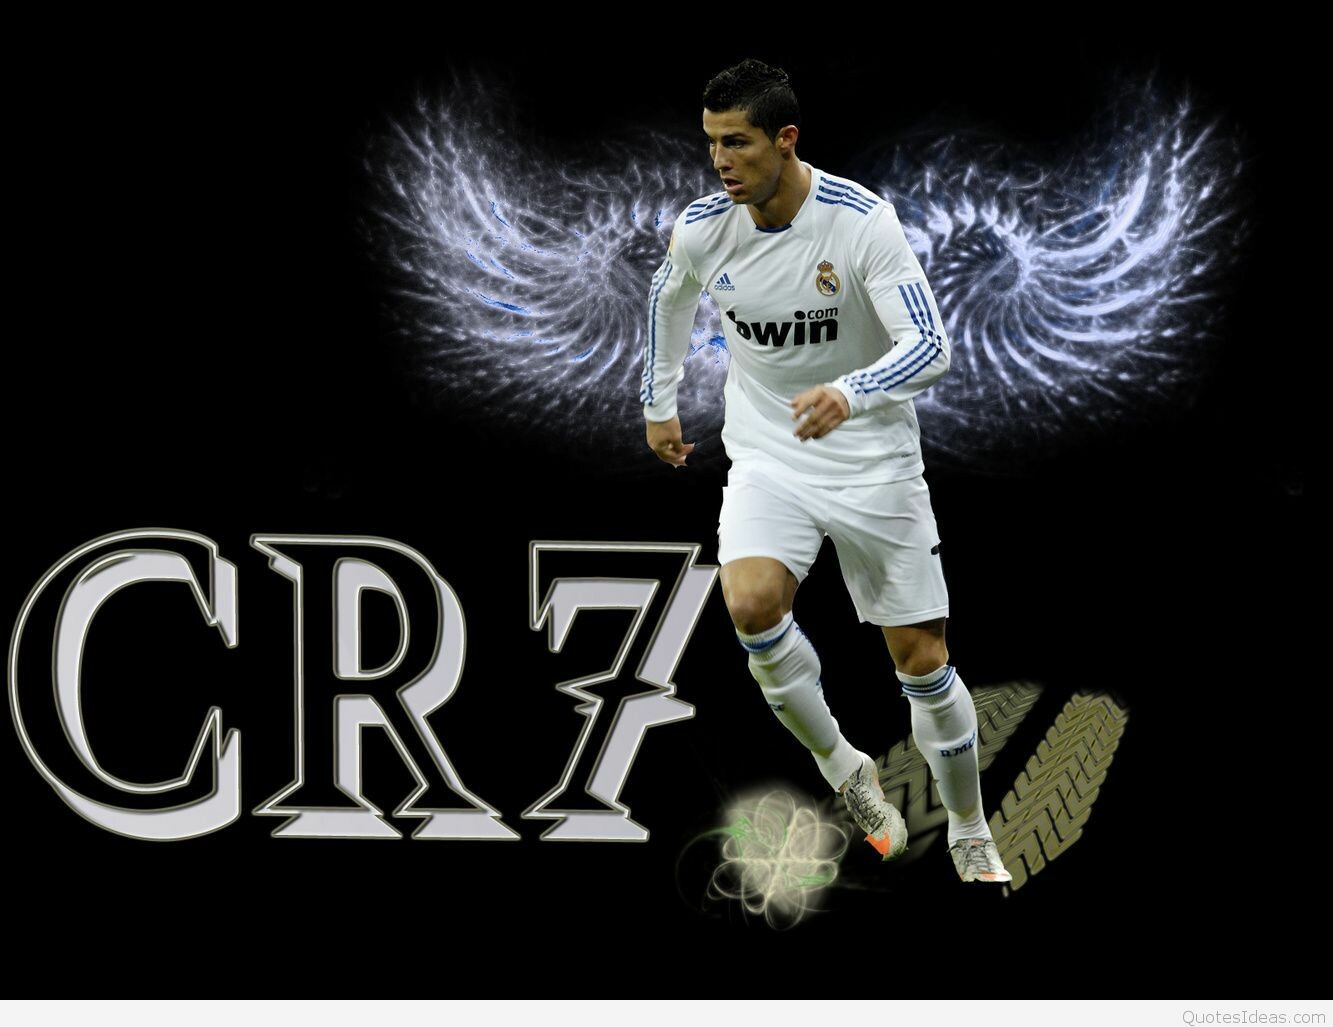 Cristiano ronaldo Wallpapers Download | MobCup